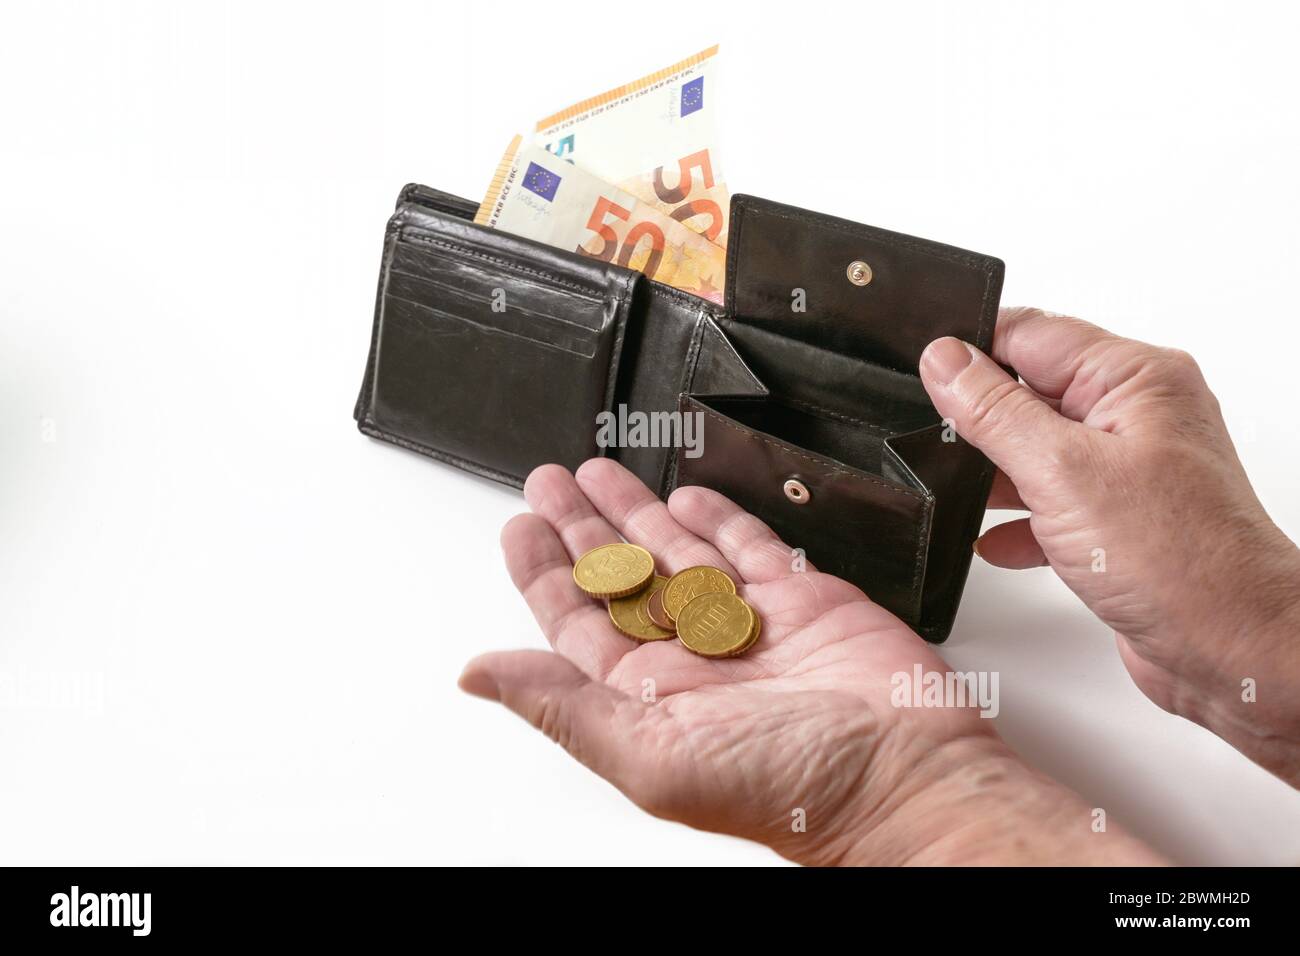 Hands of an elderly woman with a money purse and few euro coins and banknotes, cash check in the economic crisis affected by coronavirus, white backgr Stock Photo